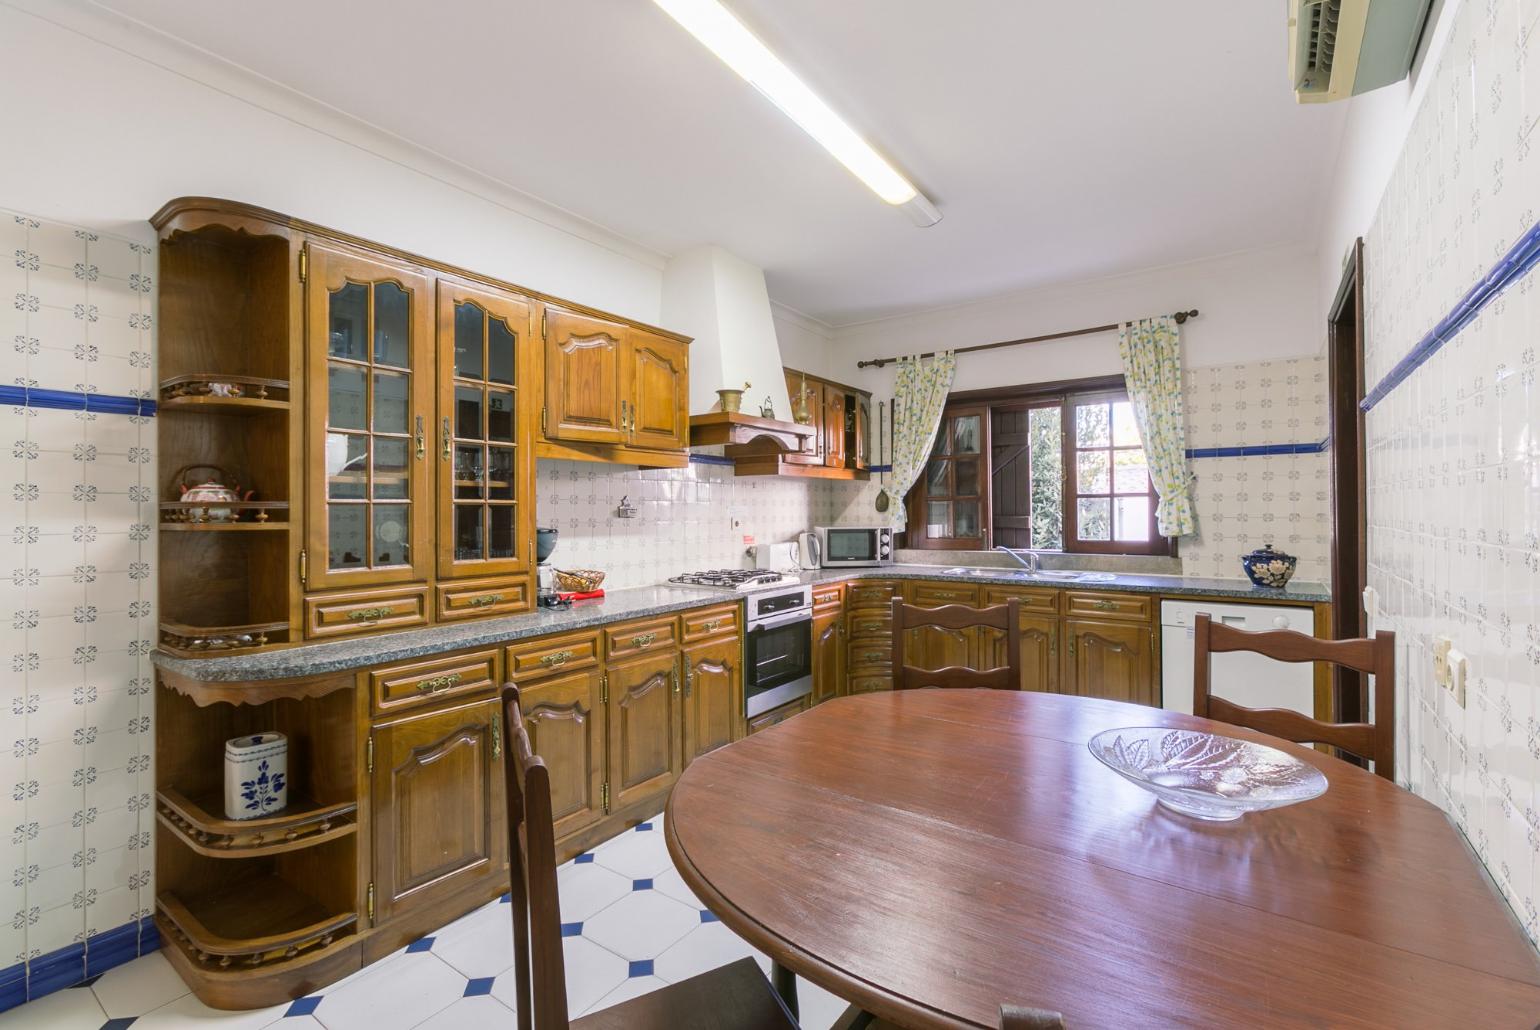 Equipped kitchen with dining table 